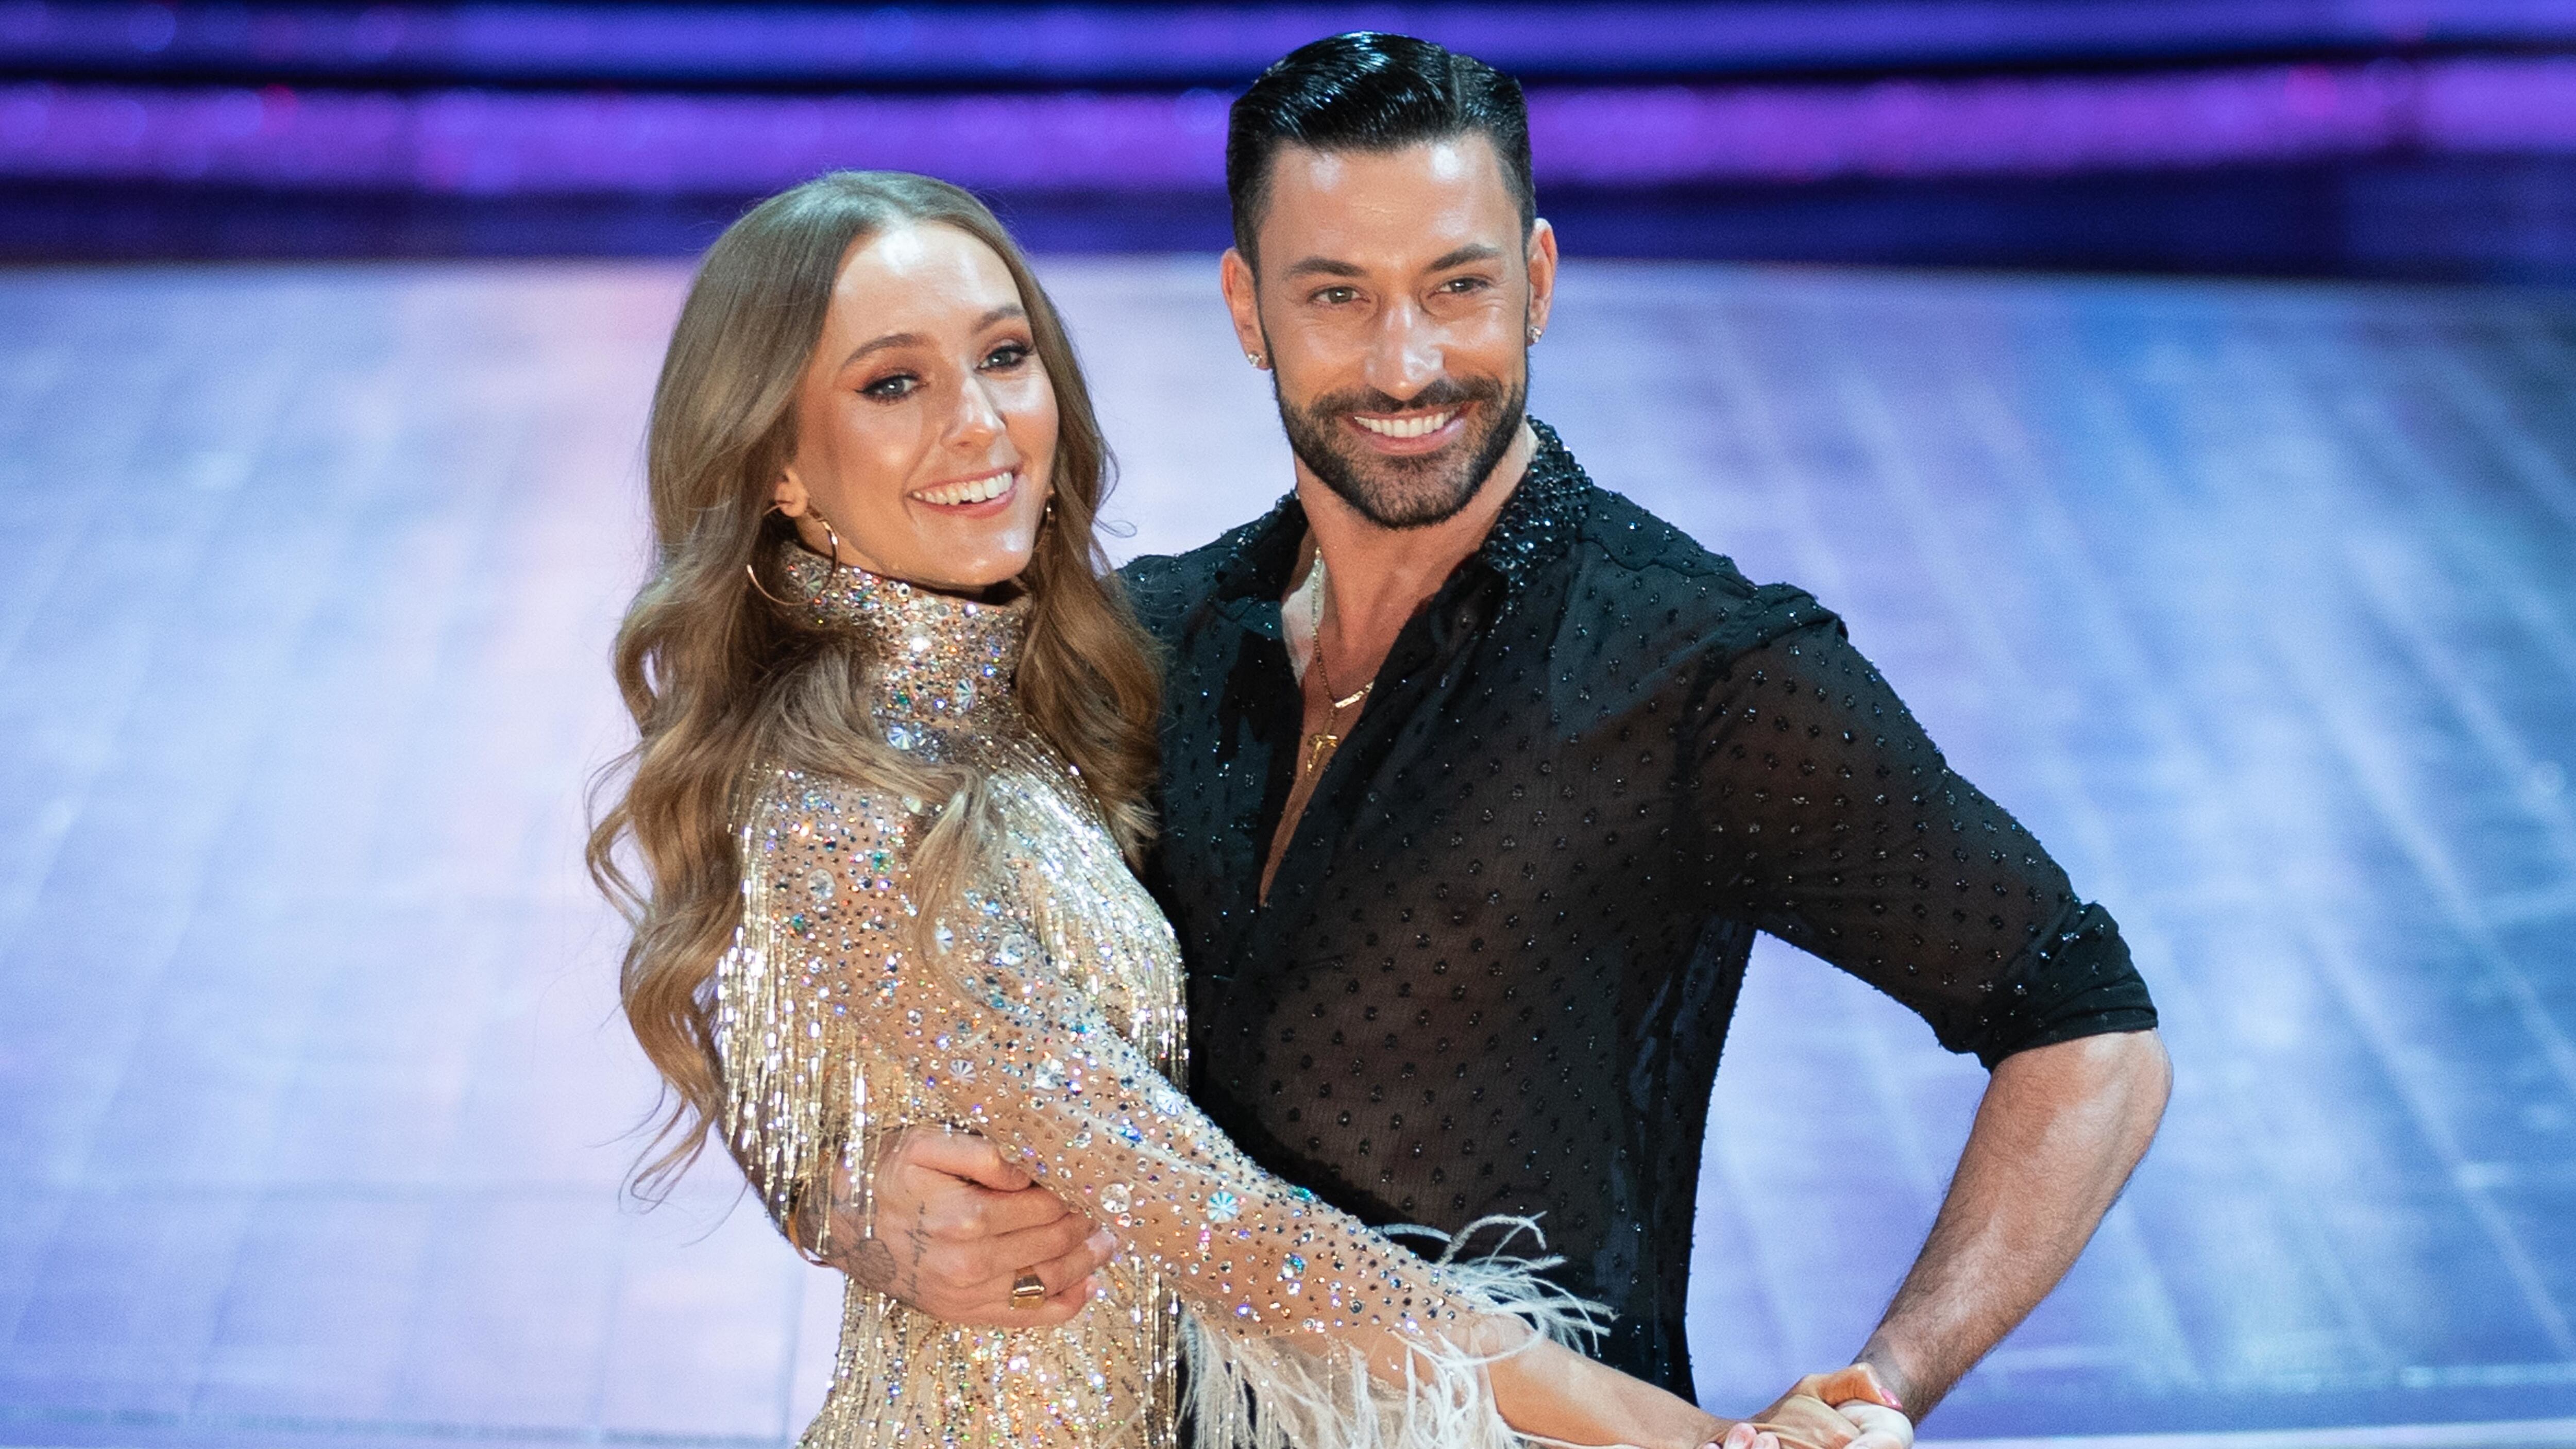 Giovanni Pernice has been a regular on Strictly Come Dancing since 2015 but will not be taking part in latest series